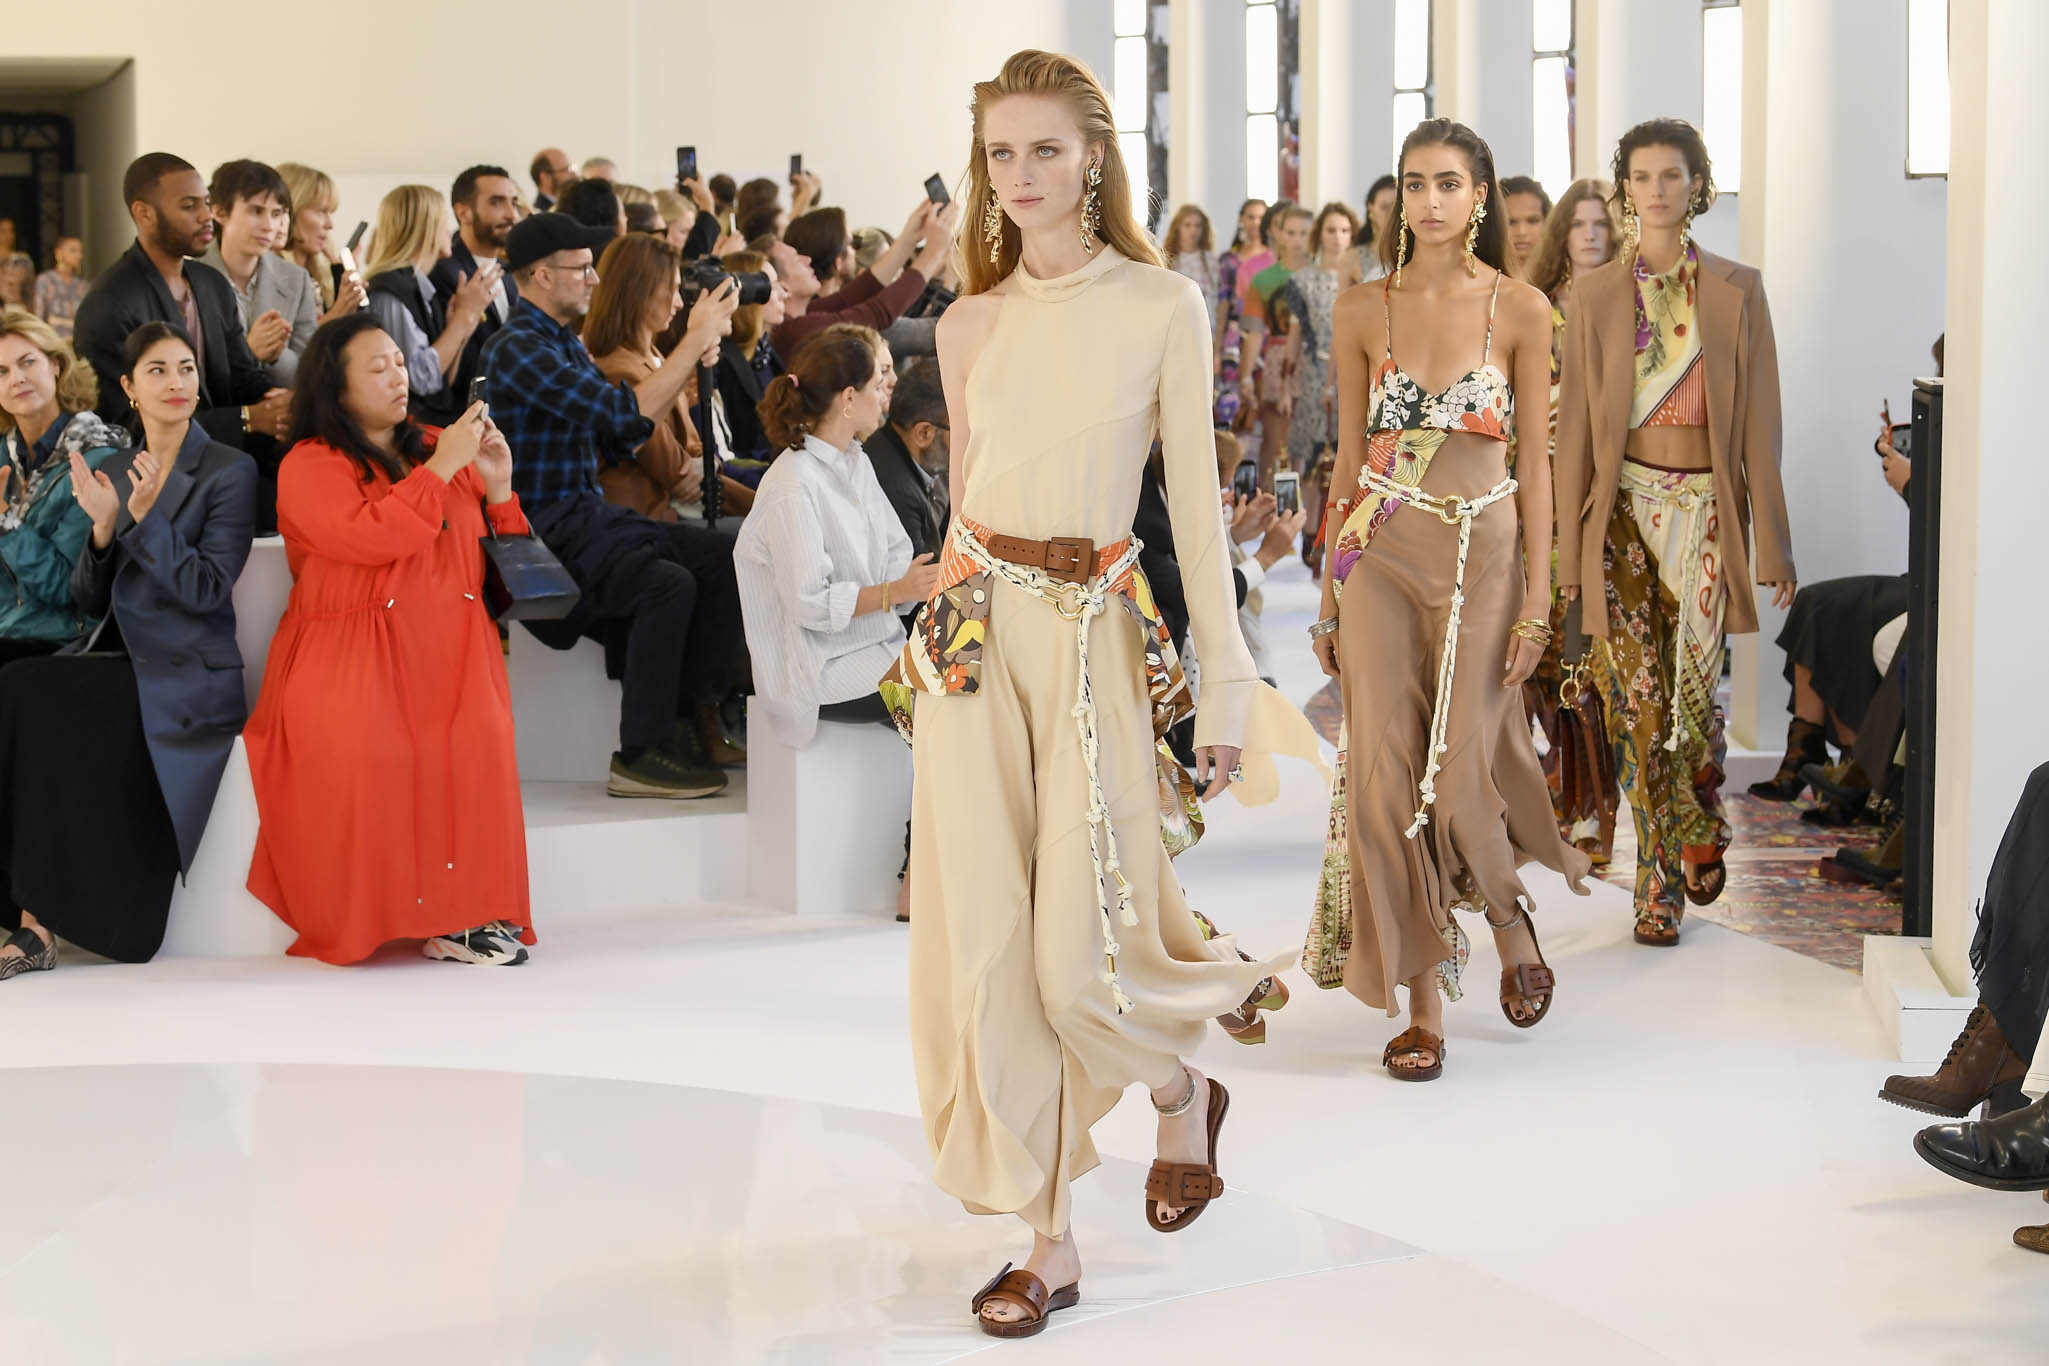 BOHO WITHOUT CLICHE, RAMSAY-LEVI LEADS SPRING 2019 CHLOE